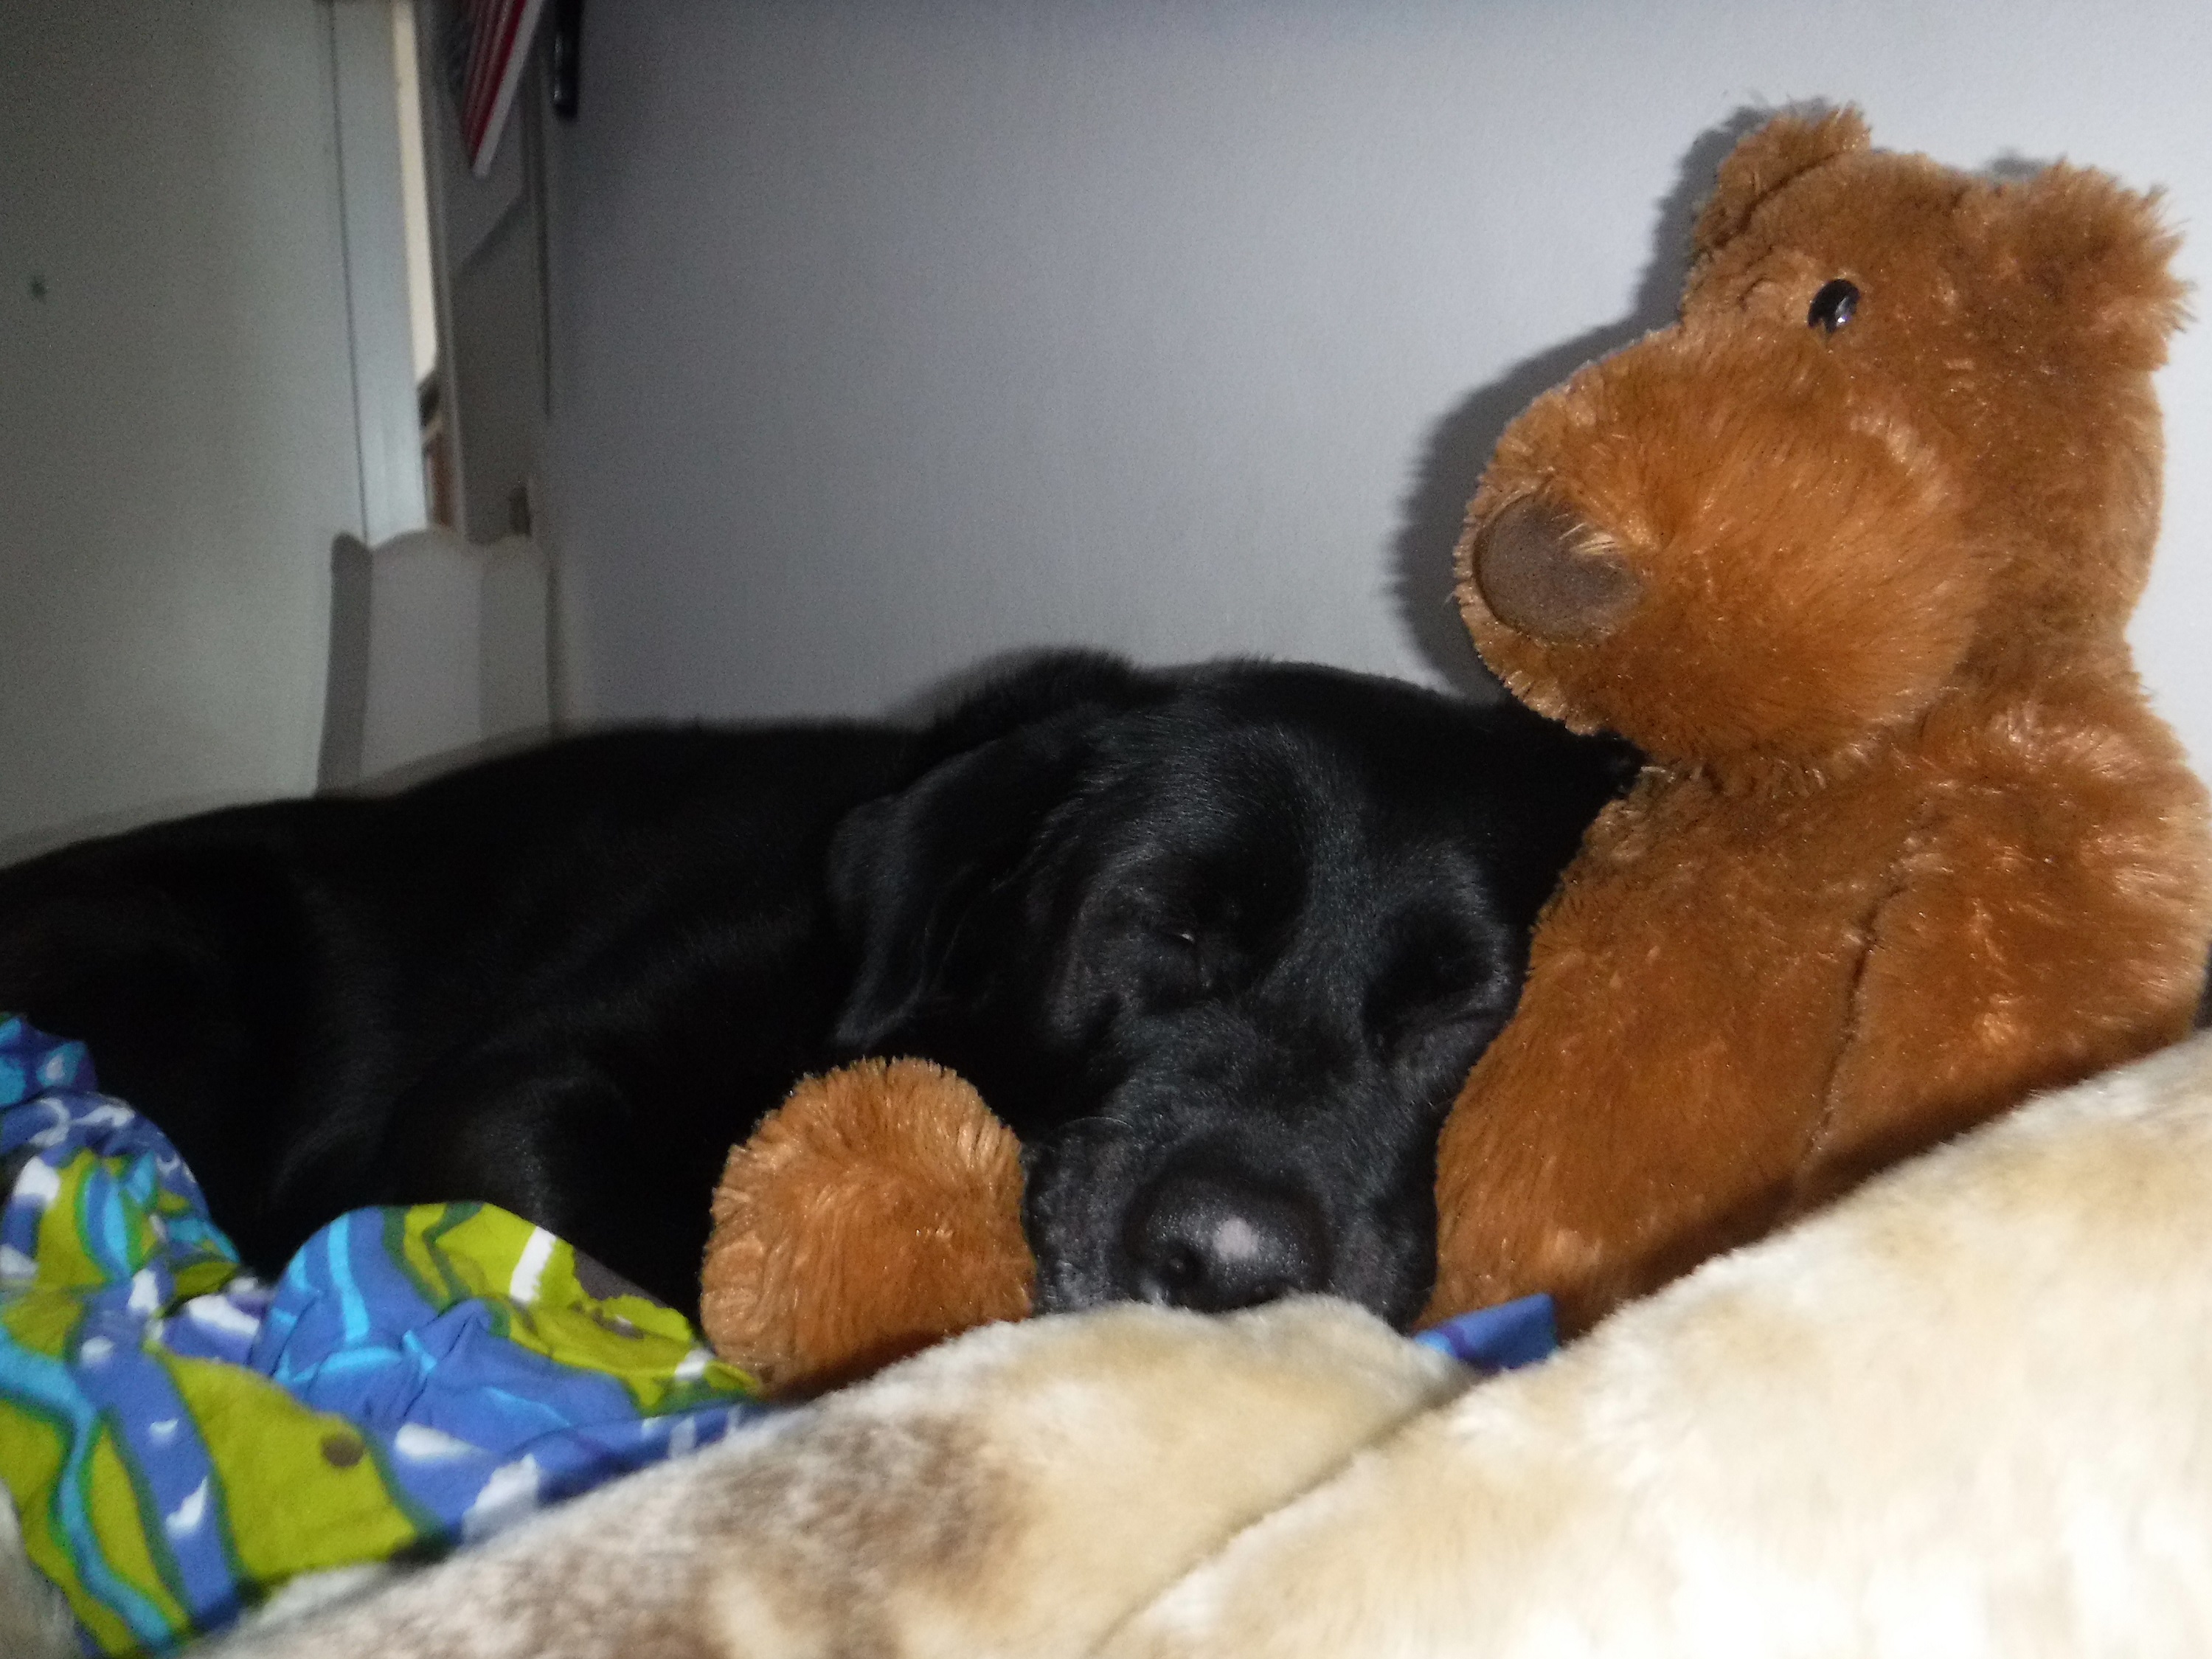 My dog Angel on my bed with one of my bears